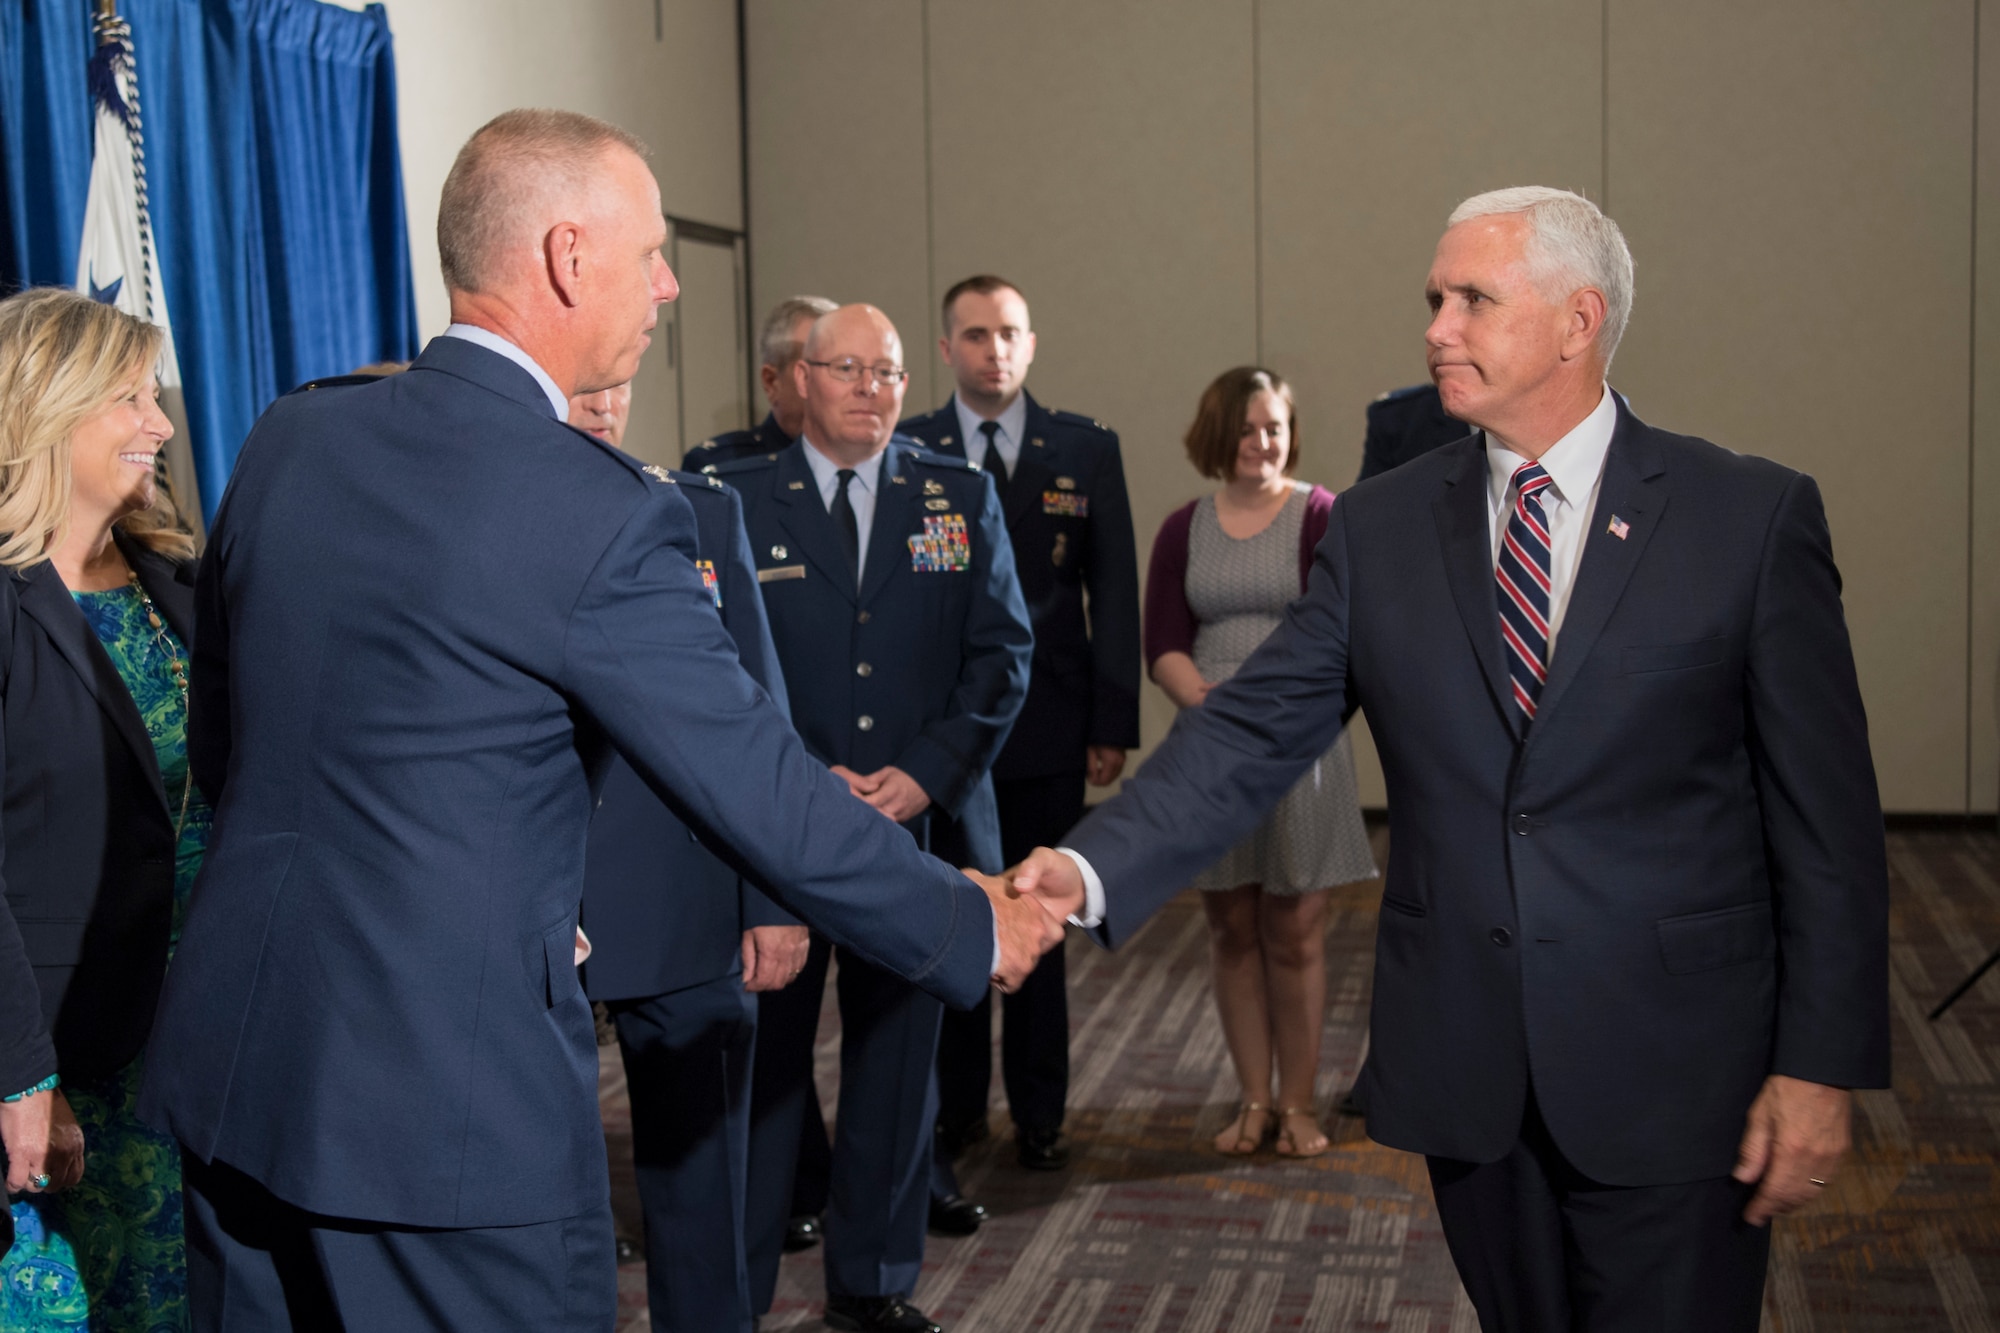 Col. Larry Shaw, 434th Air Refueling Wing commander, shakes hands with Vice President Mike Pence during a meet-and-greet in Indianapolis May 18, 2018. Shaw and five other key leadership from Grissom Air Reserve Base were invited to meet with Pence prior to his tax reform speech at the Indianapolis Downtown Marriott. (U.S. Air Force photo/Tech. Sgt. Benjamin Mota)